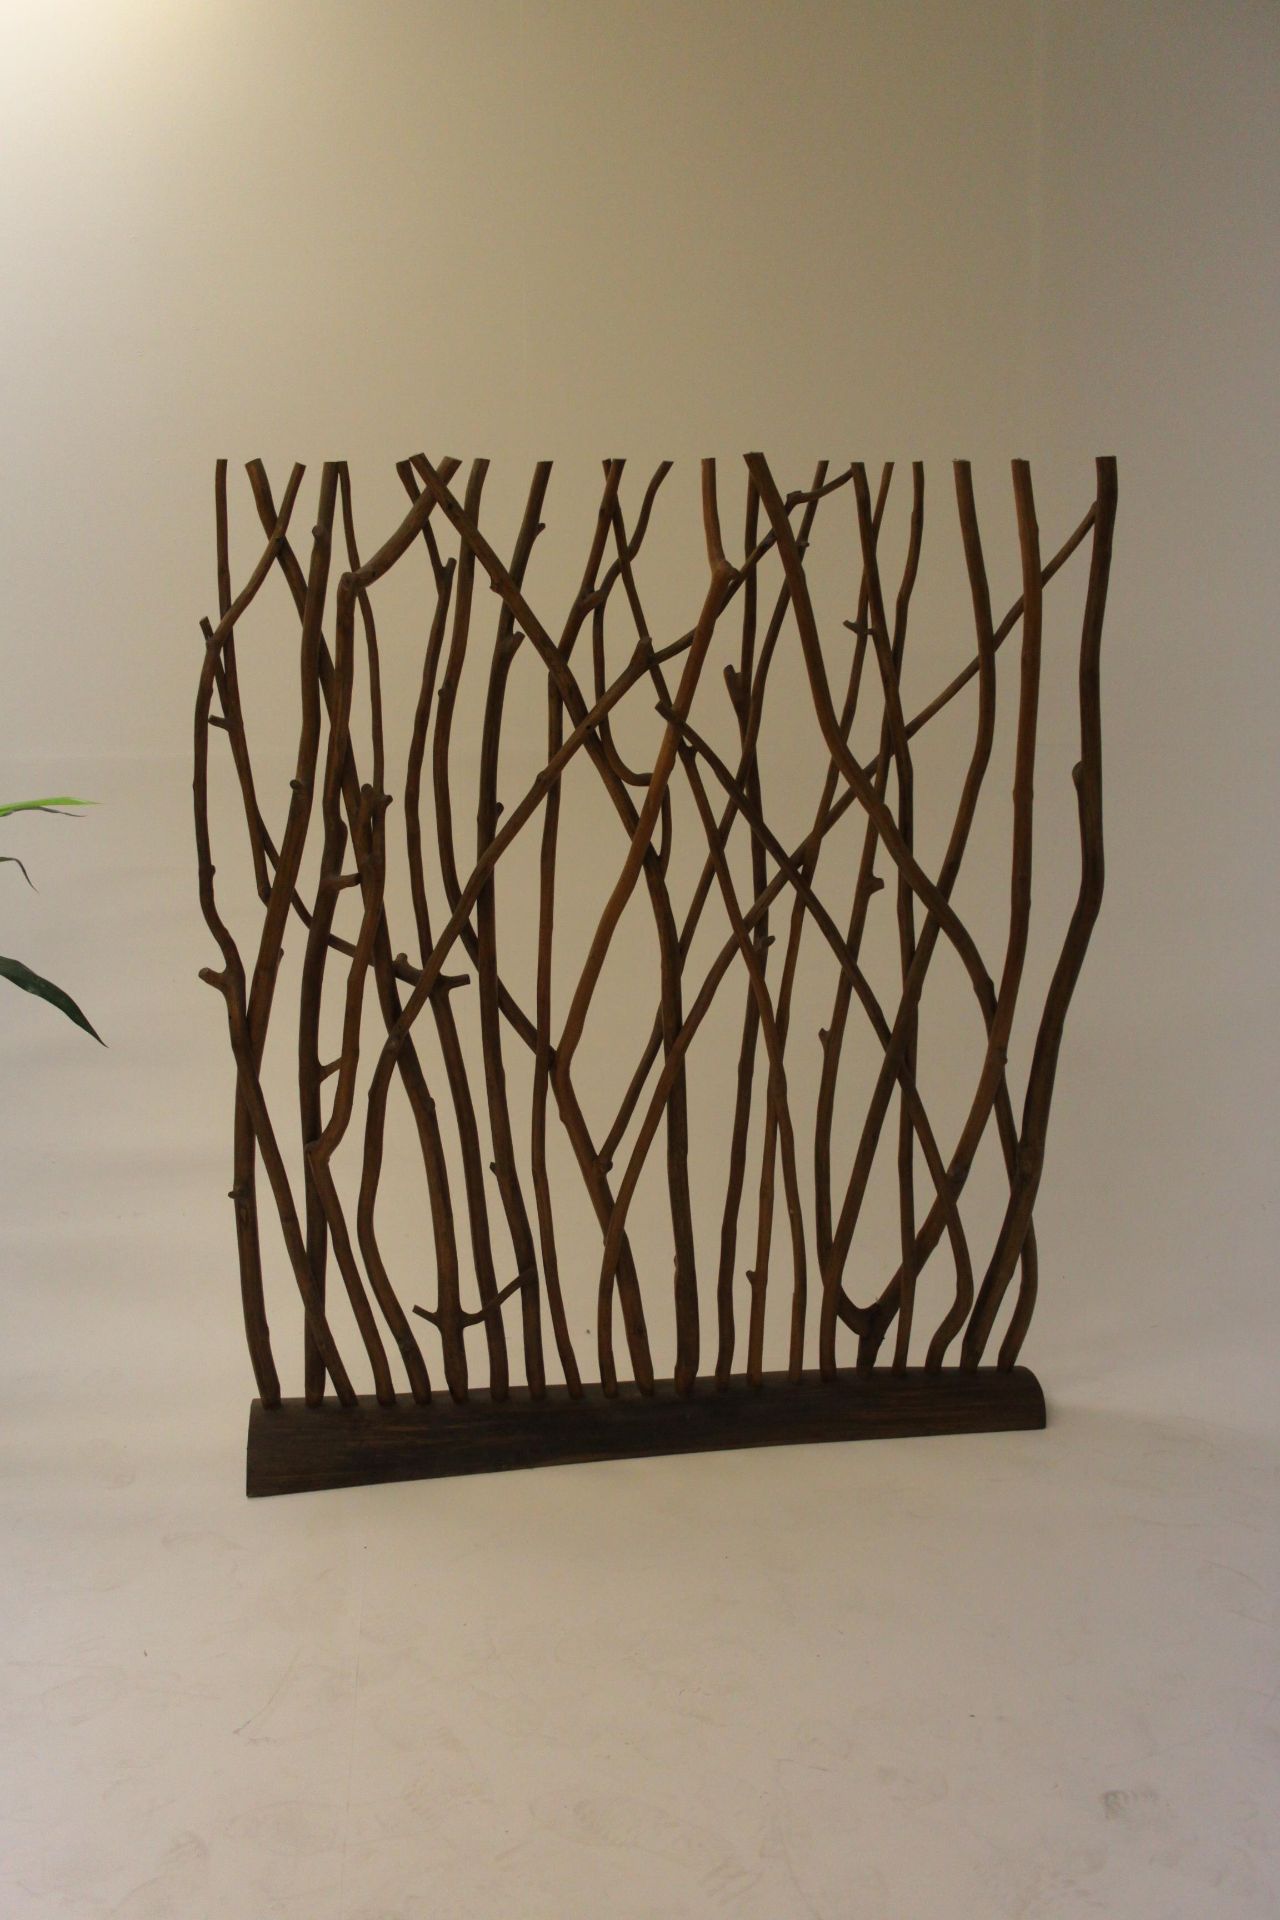 Twig Screen Panel Freestanding Privacy Or Divider Panel Bring A Little Nature To The Living Space ( - Image 3 of 3